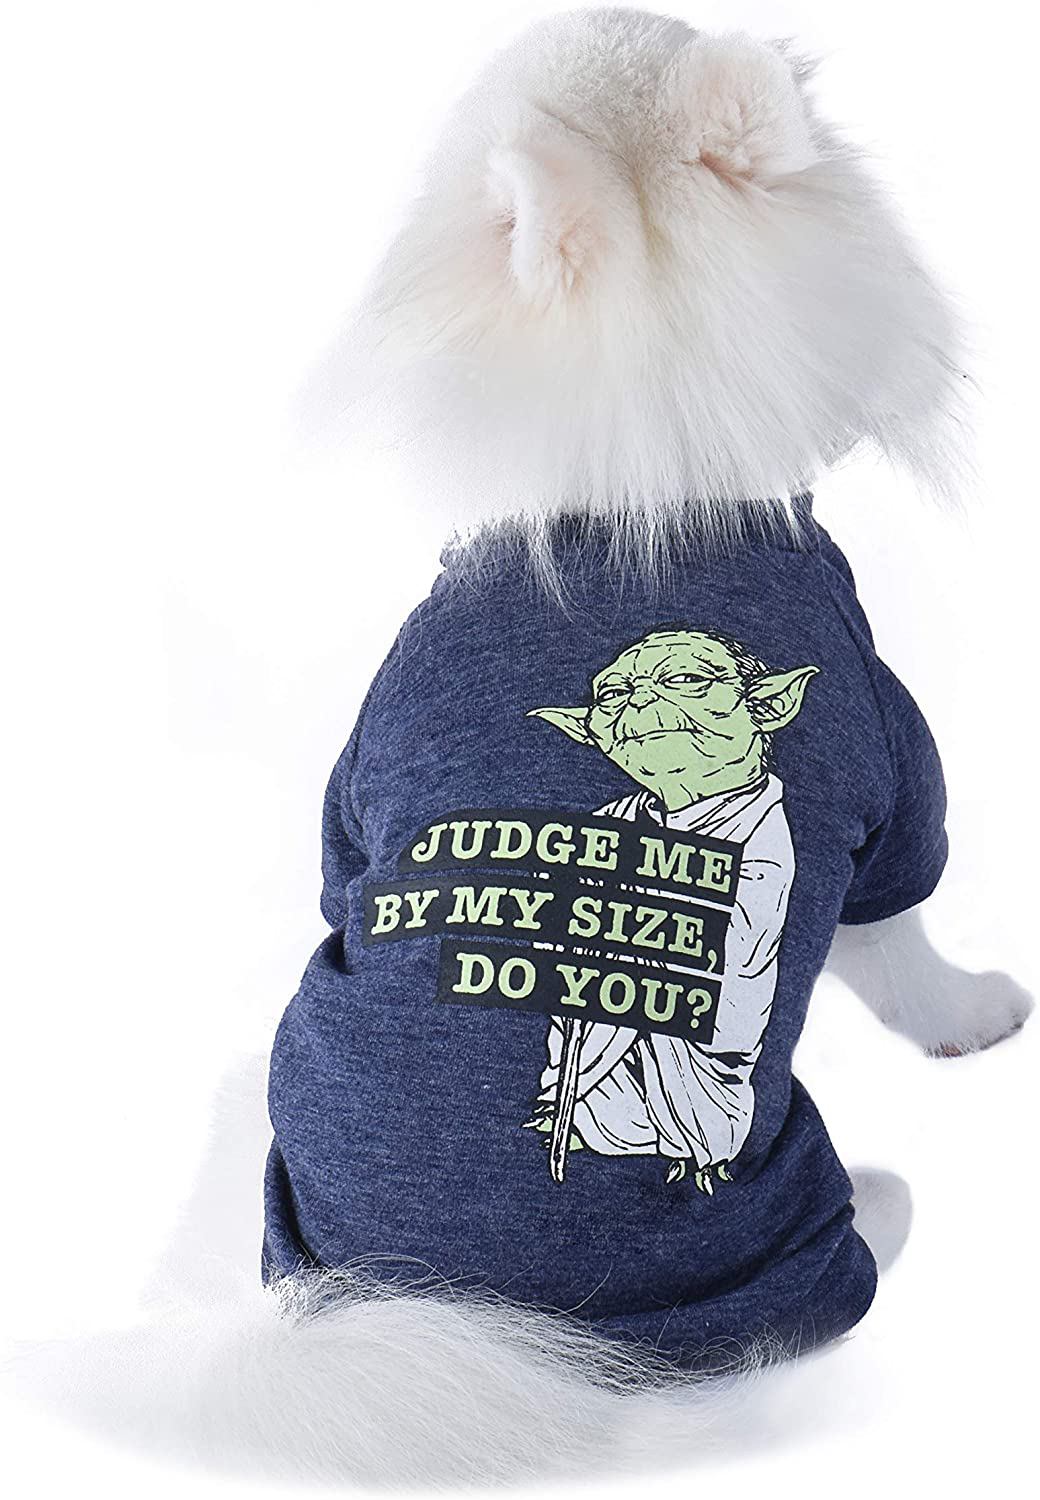 Star Wars for Pets Yoda Dog Tee - Star Wars for Pets Yoda Shirt for Dogs - Star Wars Dog Costume, Dog Clothes, Star Wars Dog Shirt, Star Wars Pet Shirt, Pet Clothes, Yoda Pet Shirt Animals & Pet Supplies > Pet Supplies > Cat Supplies > Cat Apparel Fetch for Pets   